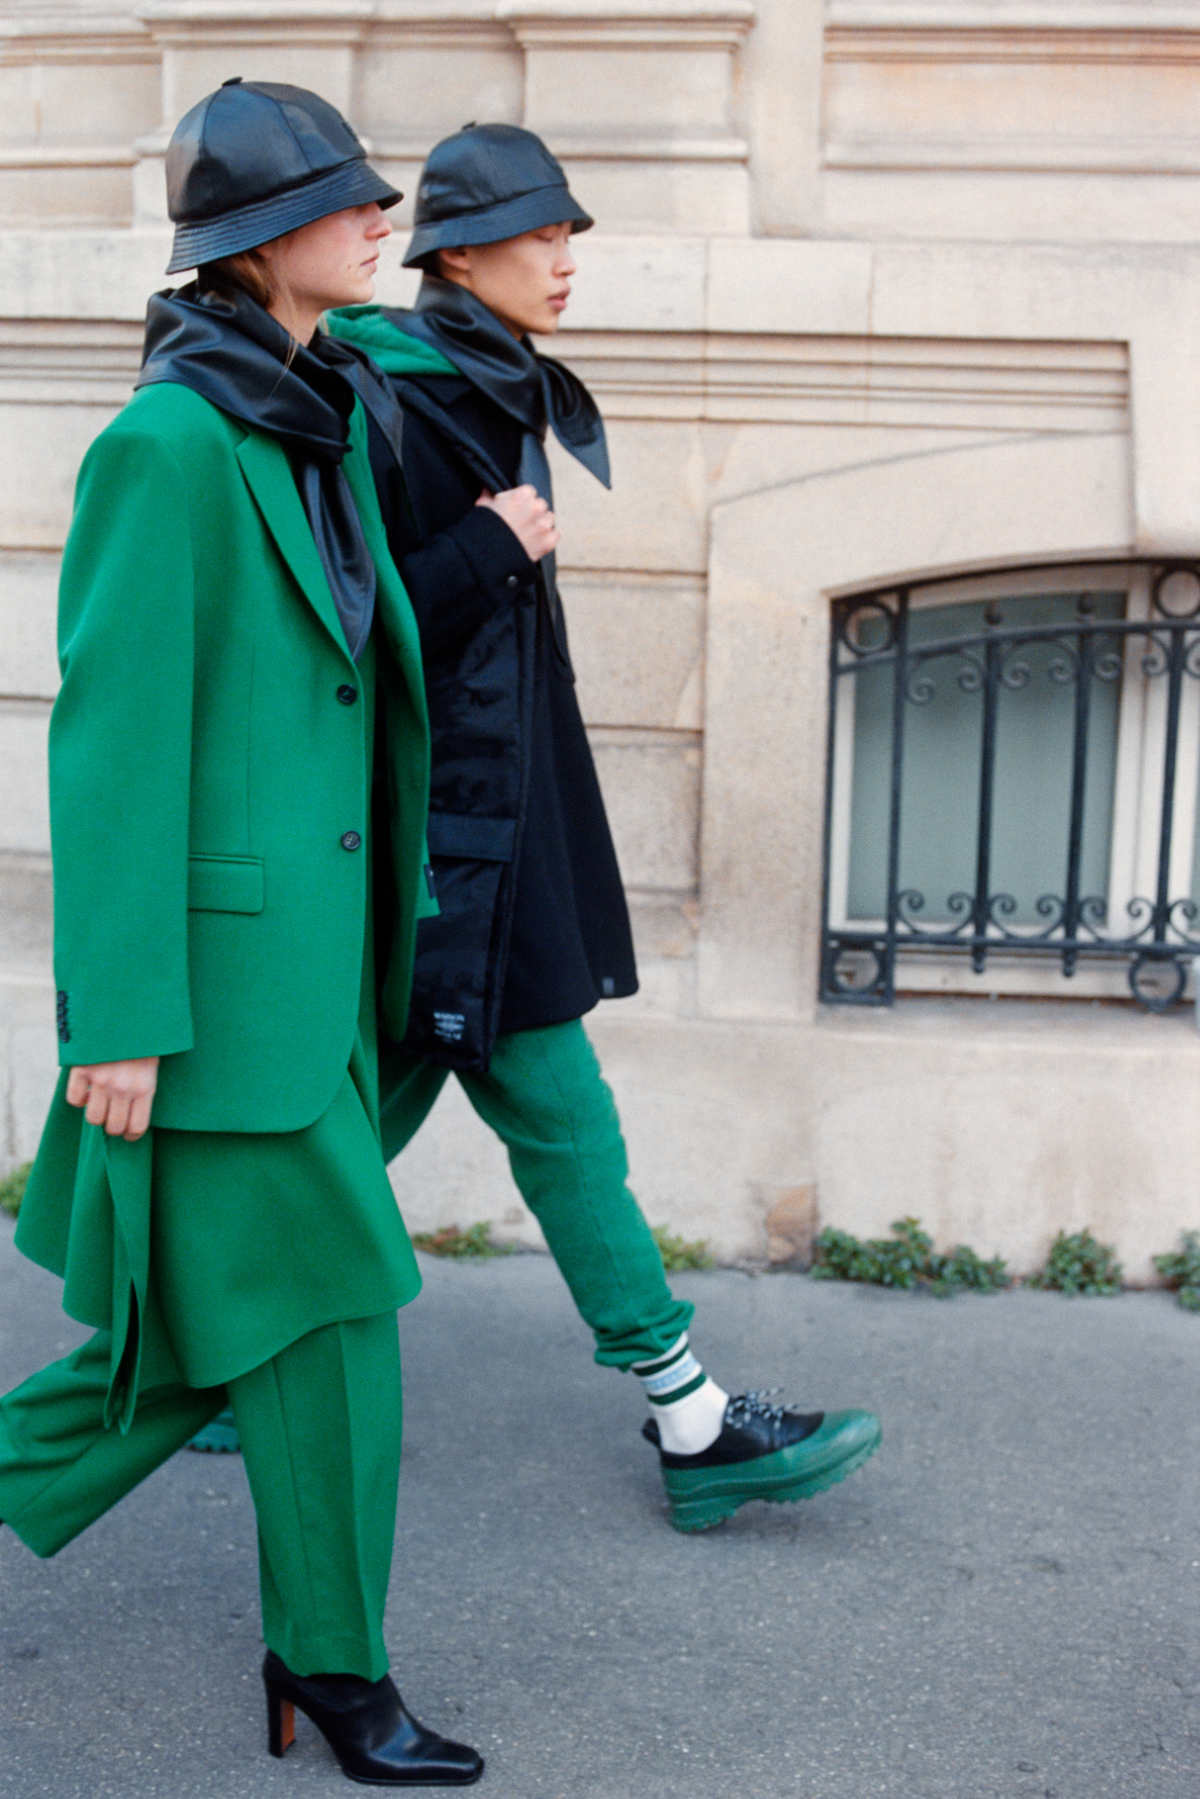 Maison Maison Maison Maison Maison Maison Maison Maison Maison Maison Maison Maison Maison Maison Maison Maison Maison Maison Maison Maison Maison Maison Maison Maison Maison Kitsuné Presents Its New Fall-Winter 2022/23 Collection: Proportion At Play